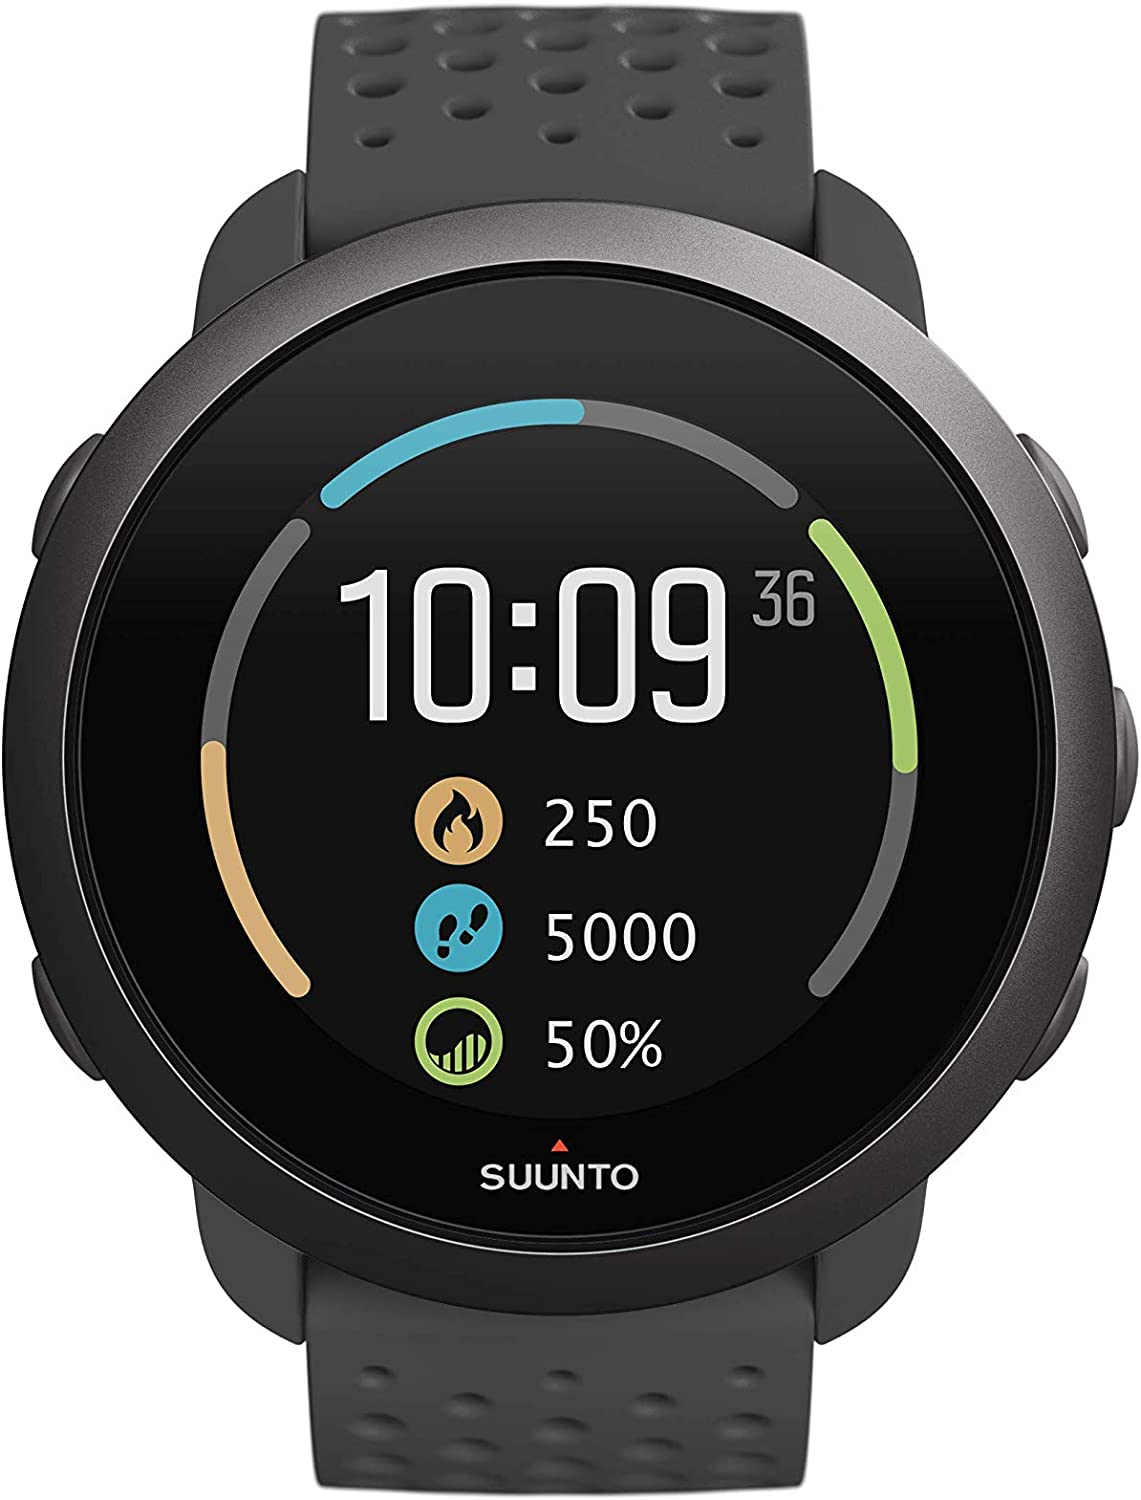 Suunto 3 2020 Full Specifications, Features and Price - Geeky Wrist